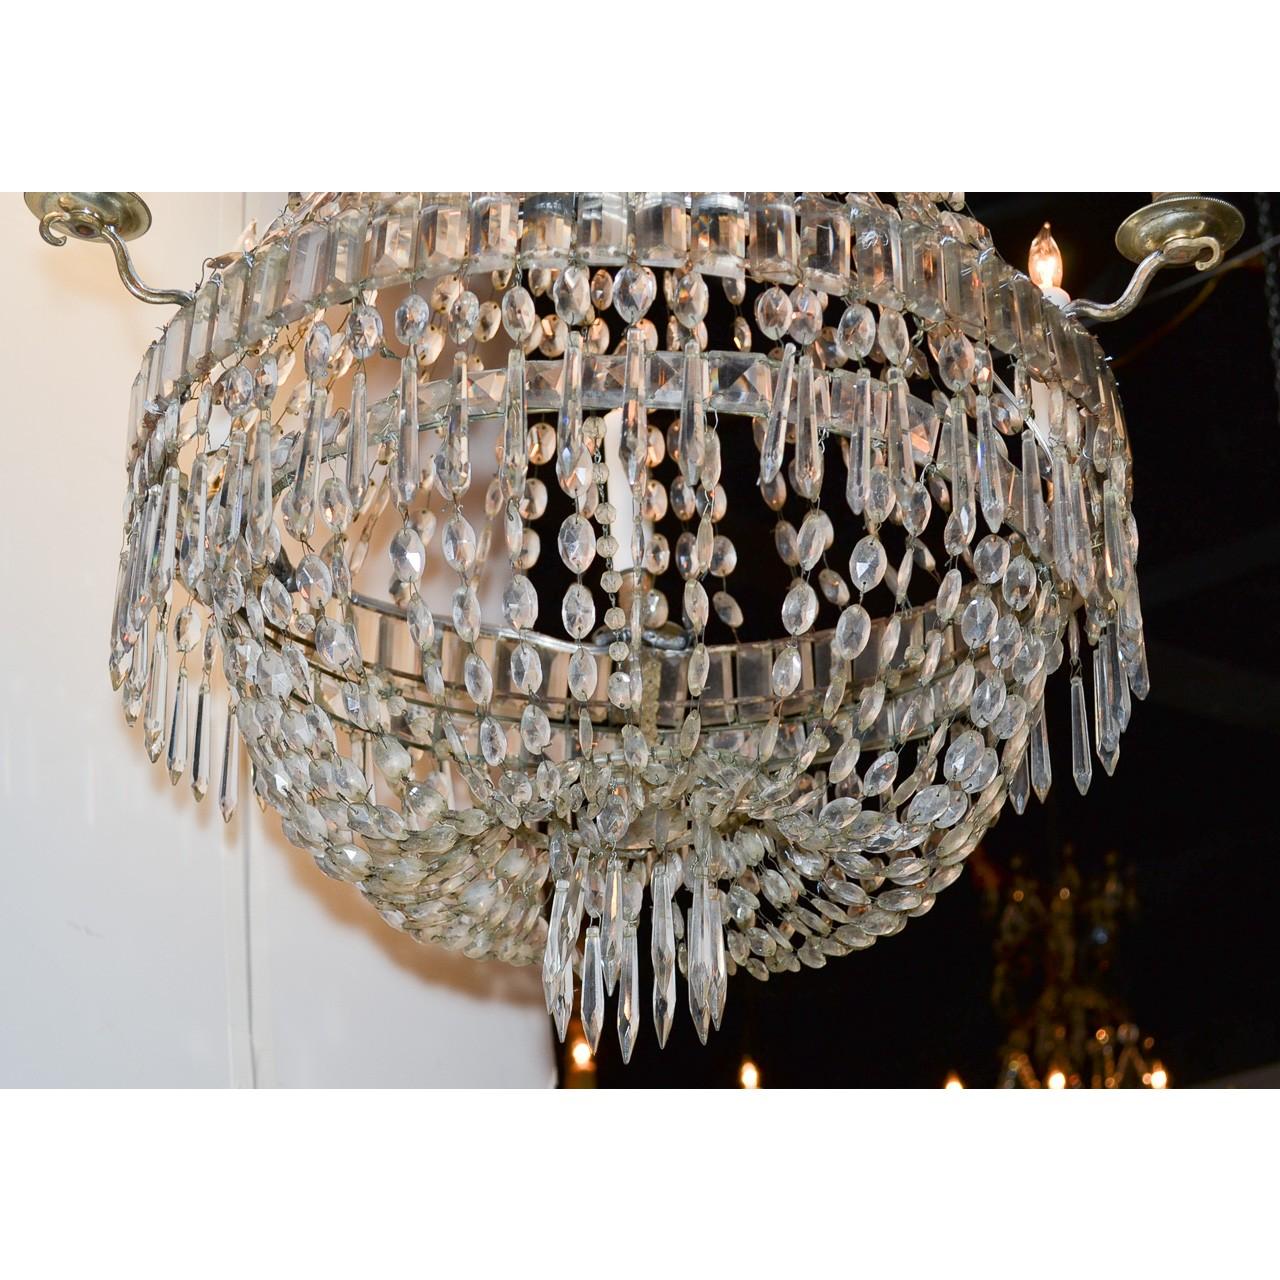 Understated antique Swedish crystal basket-form chandelier with strands of faceted bead prisms suspended from the crown adorned with baguette cut crystals and icicle prisms. The basket-shaped base surmounted by small scrolling arms and bobeche, and